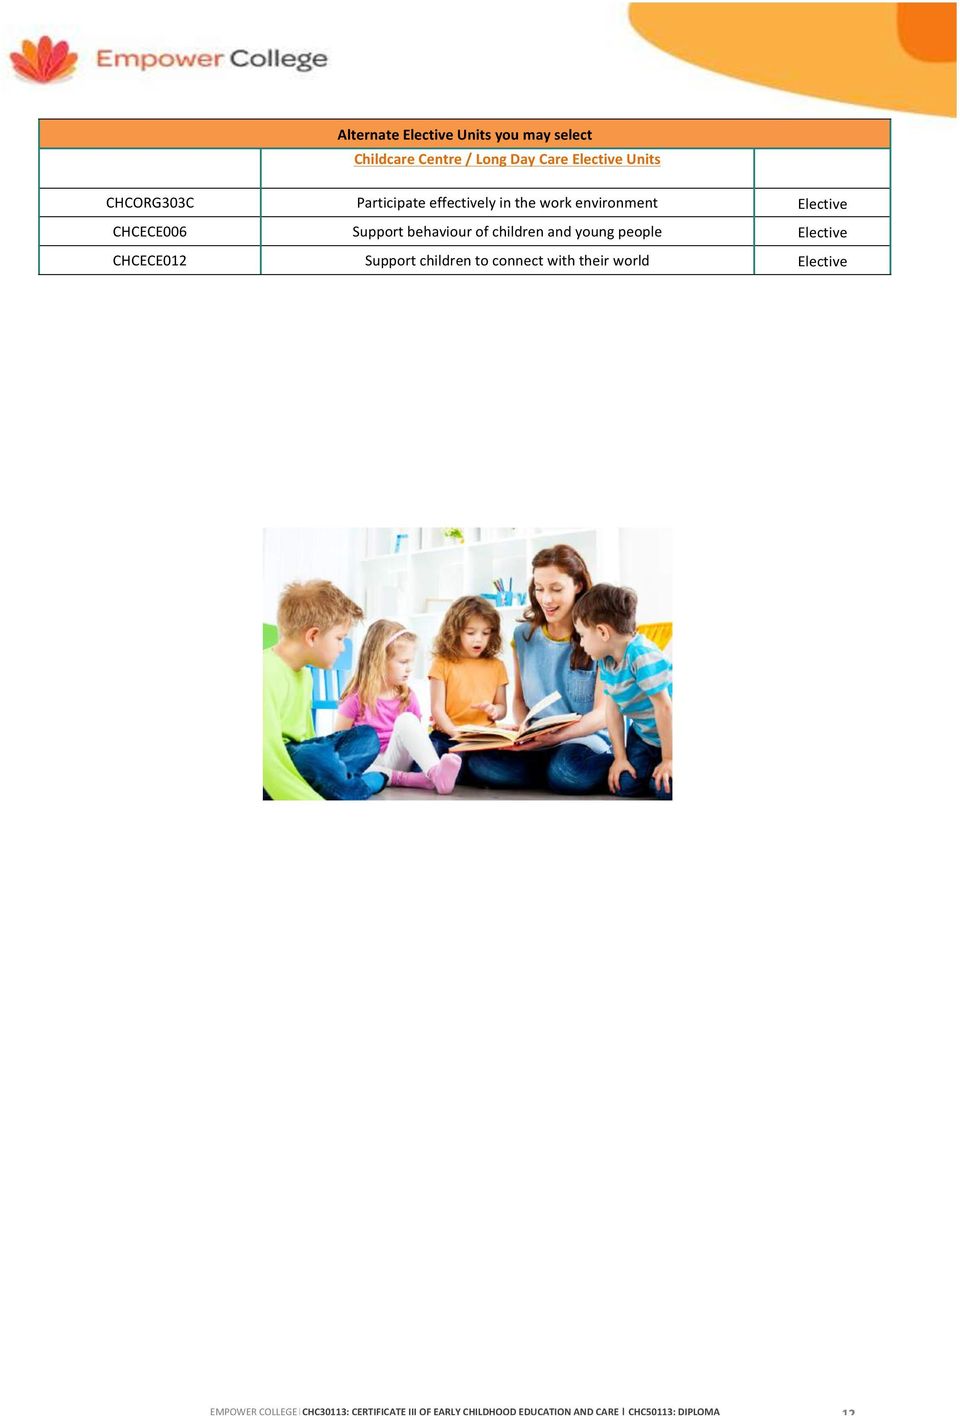 environment Elective CHCECE006 Support behaviour of children and young